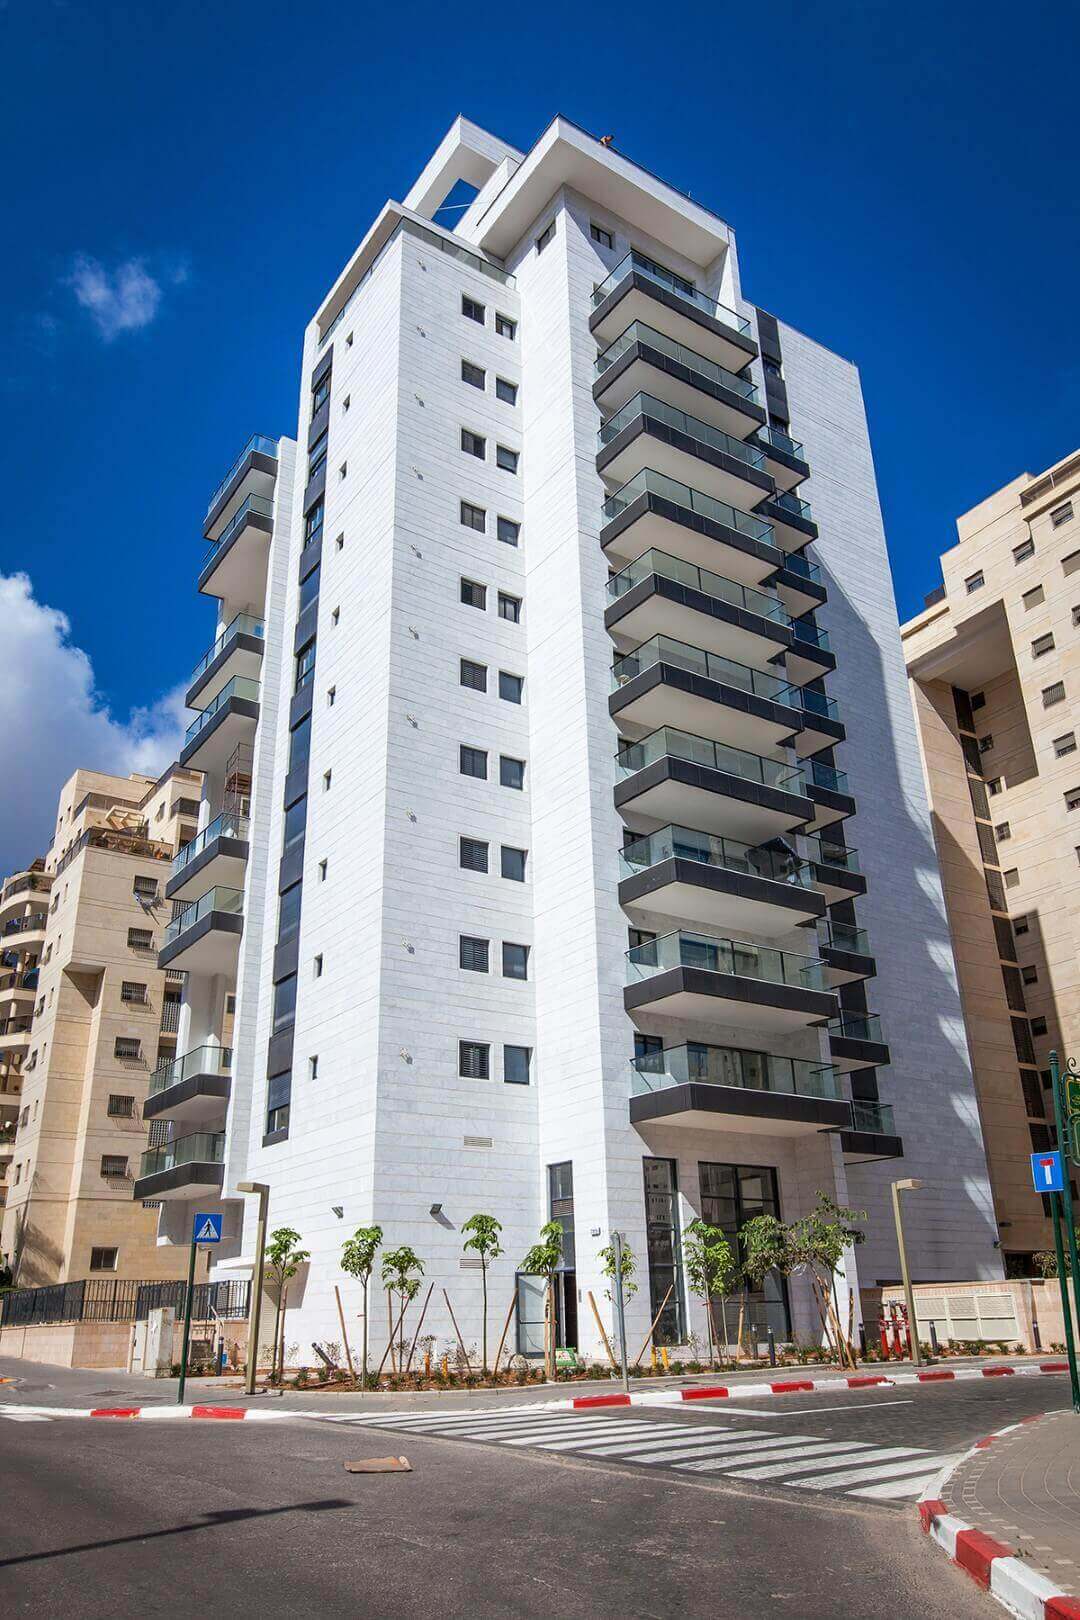 Photograph of a building from the UNIK BOUTIQUE project in Rishon Lezion